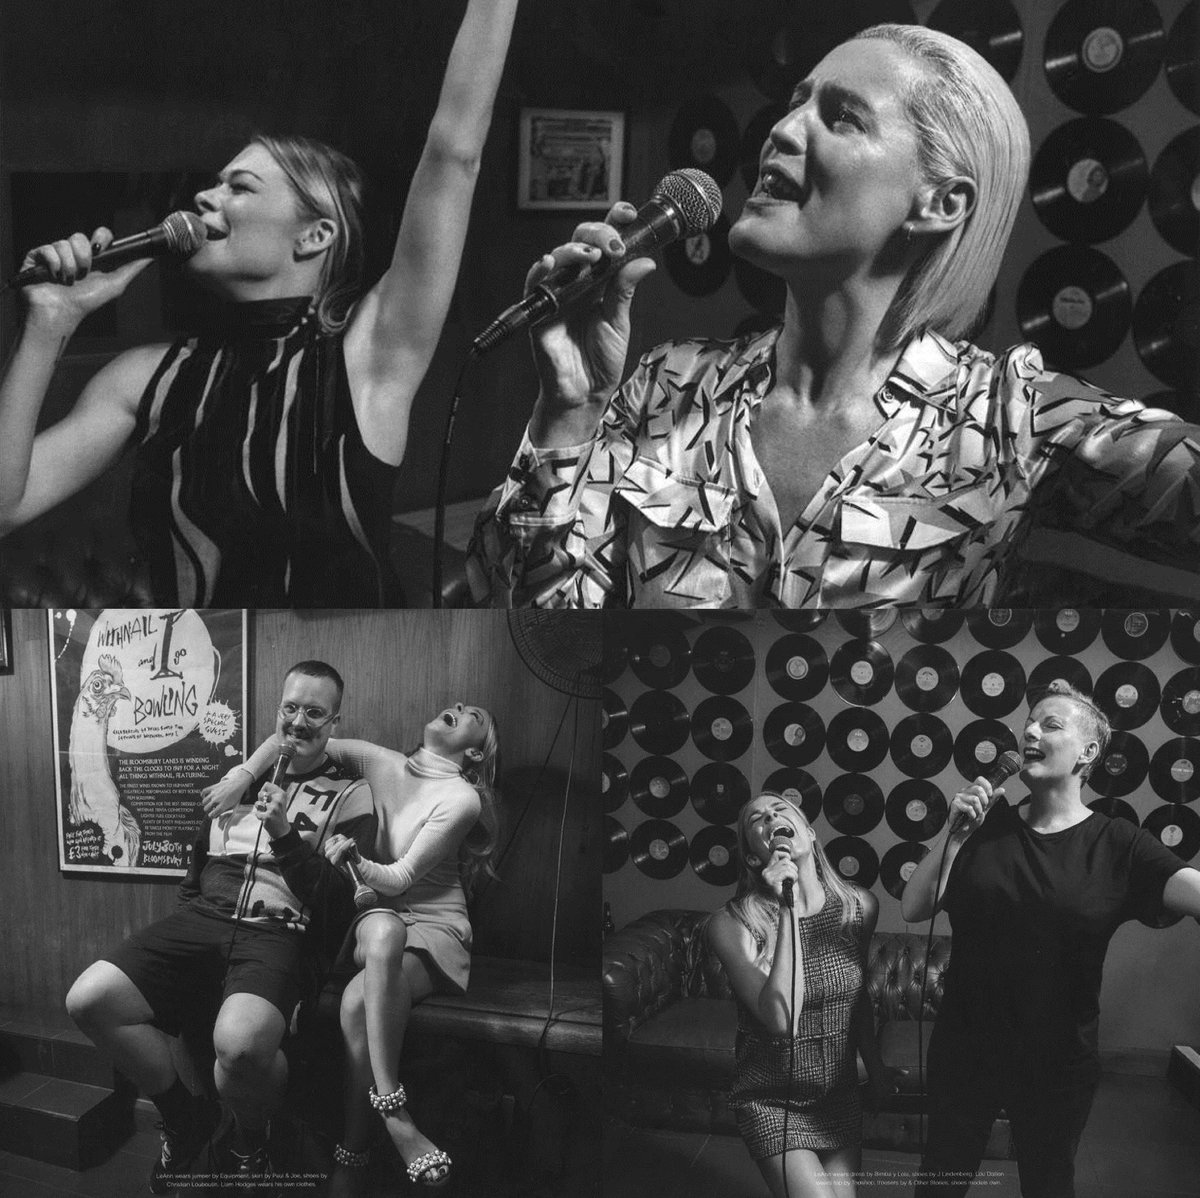 Funnest photoshoot ever! It’s not often you get to sing in a karaoke bar at work. Thanks @rollacoaster <3 https://t.co/q3YUzSOdzN